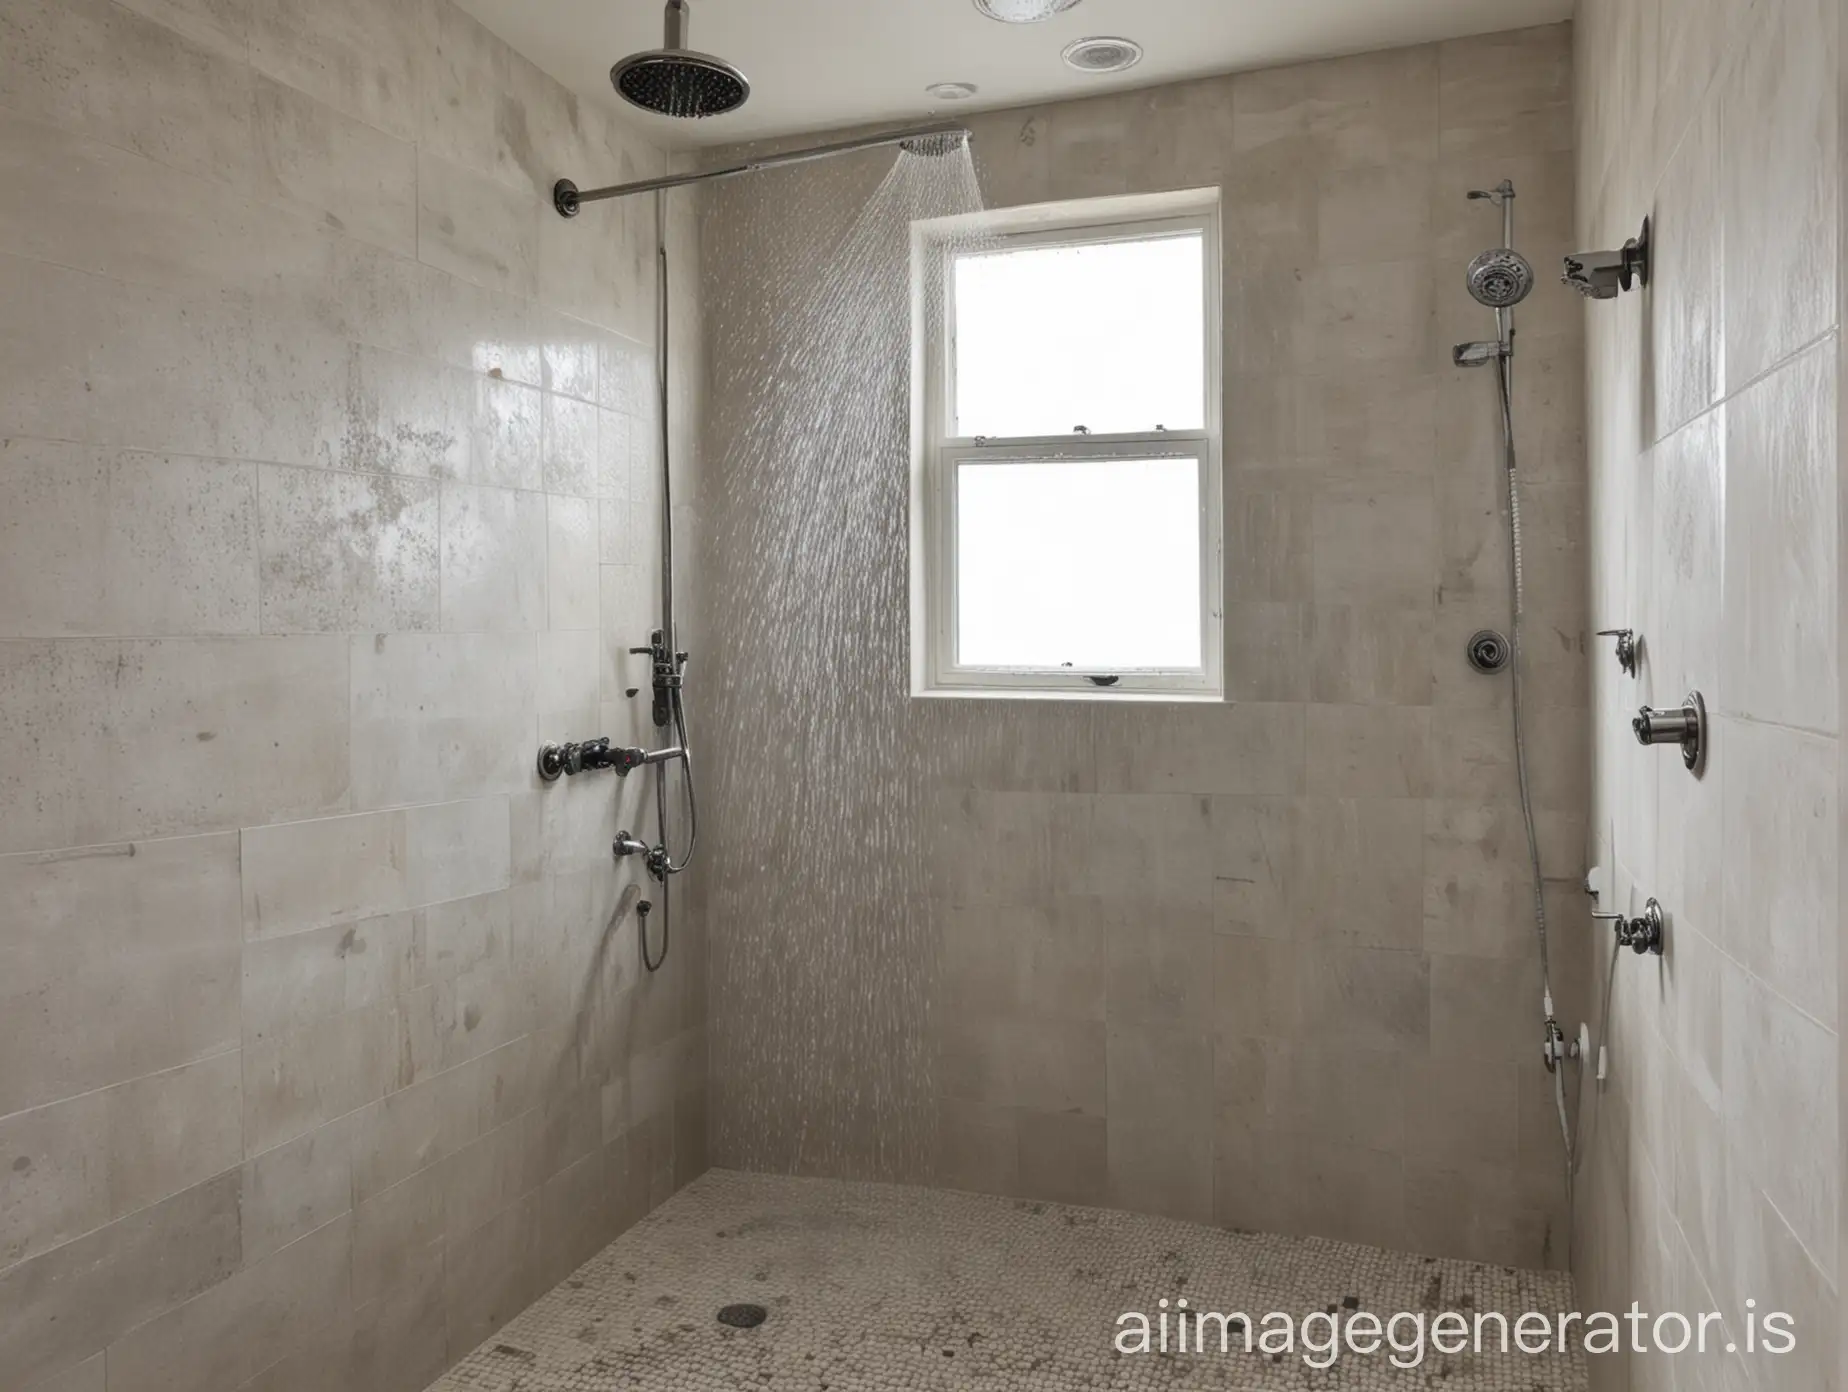 Bathroom-Shower-with-Water-Spray